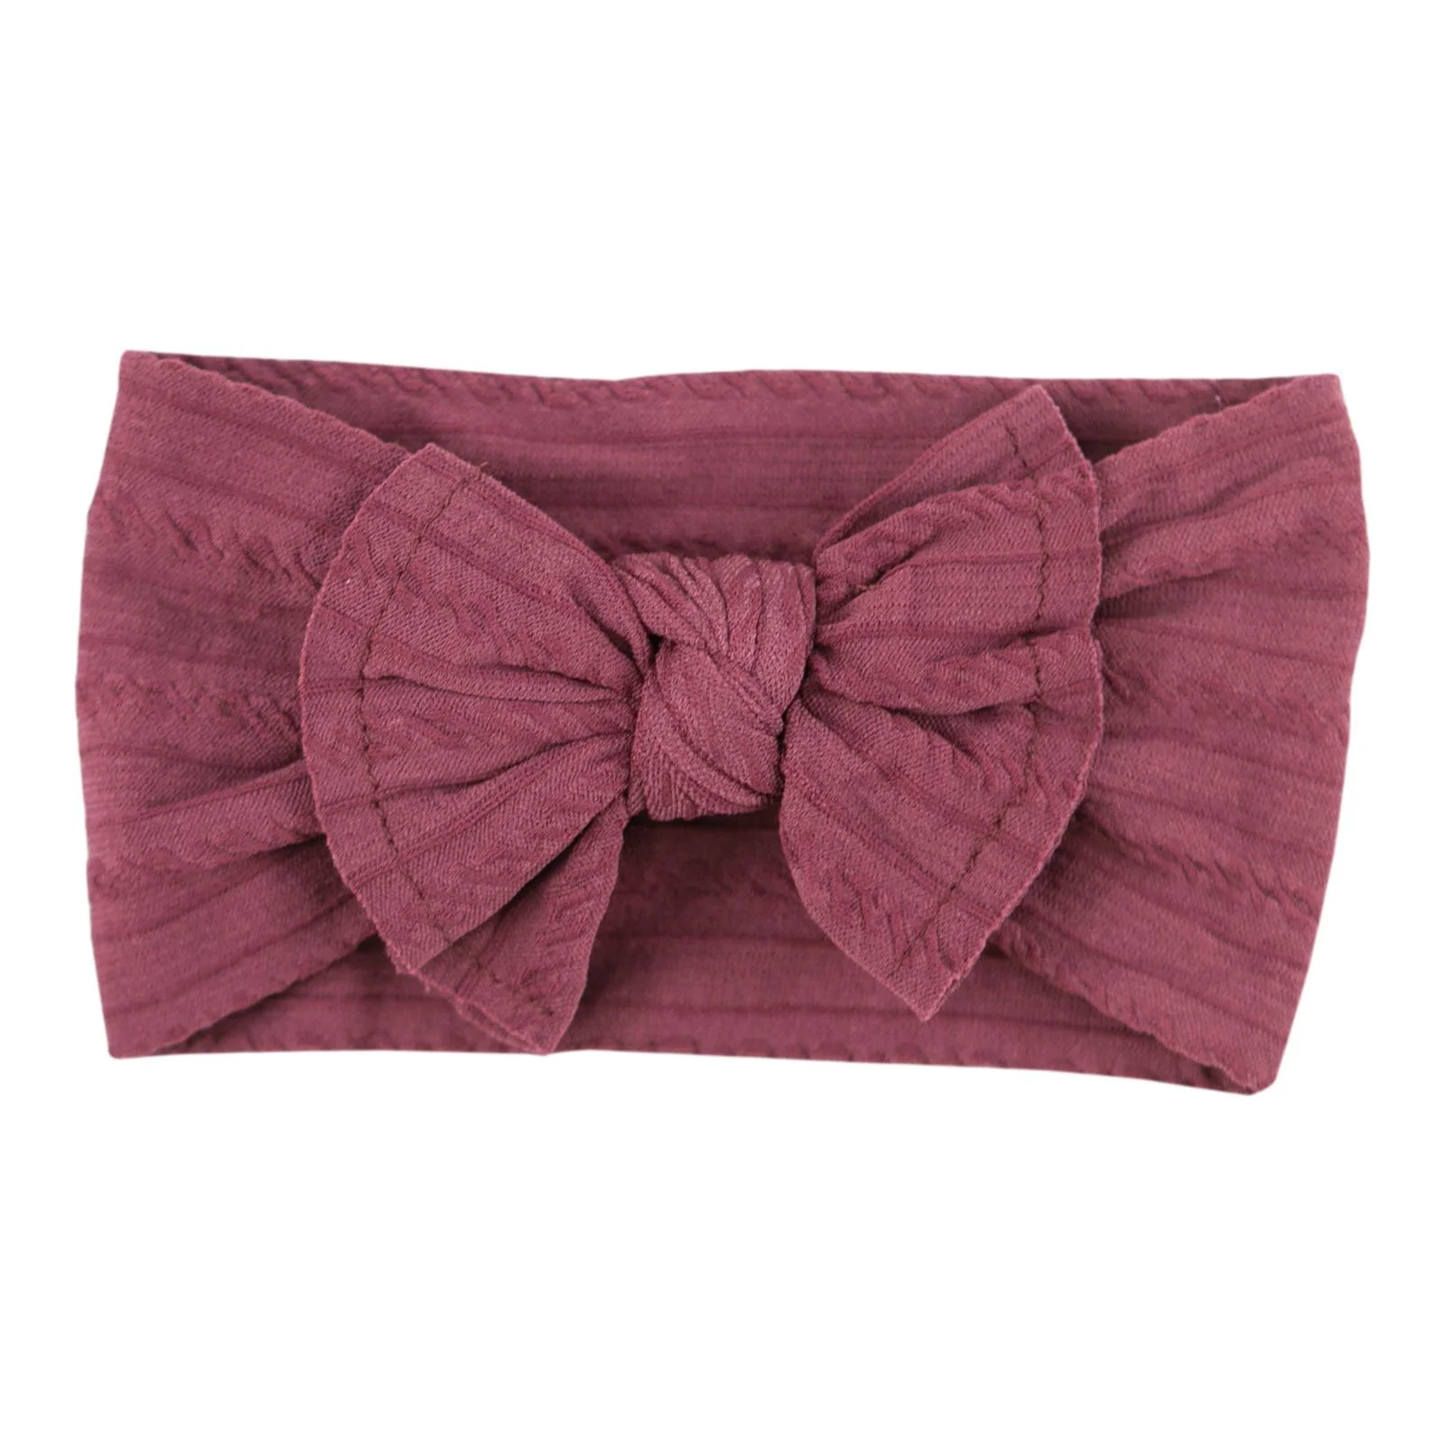 Baby Bow Headwrap